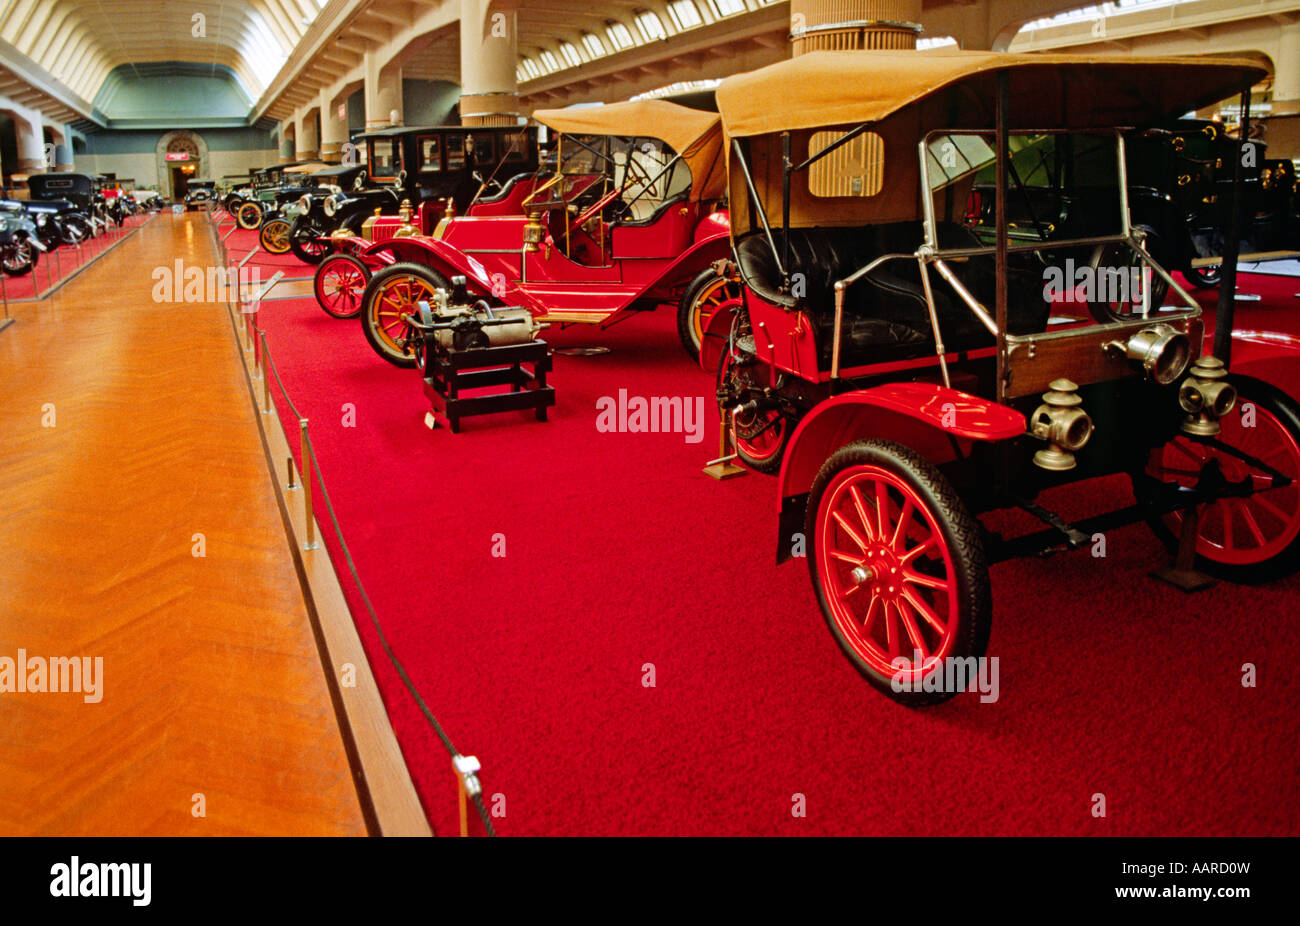 Old automobiles in the HENRY FORD MUSEUM DEARBORN MICHIGAN Stock Photo